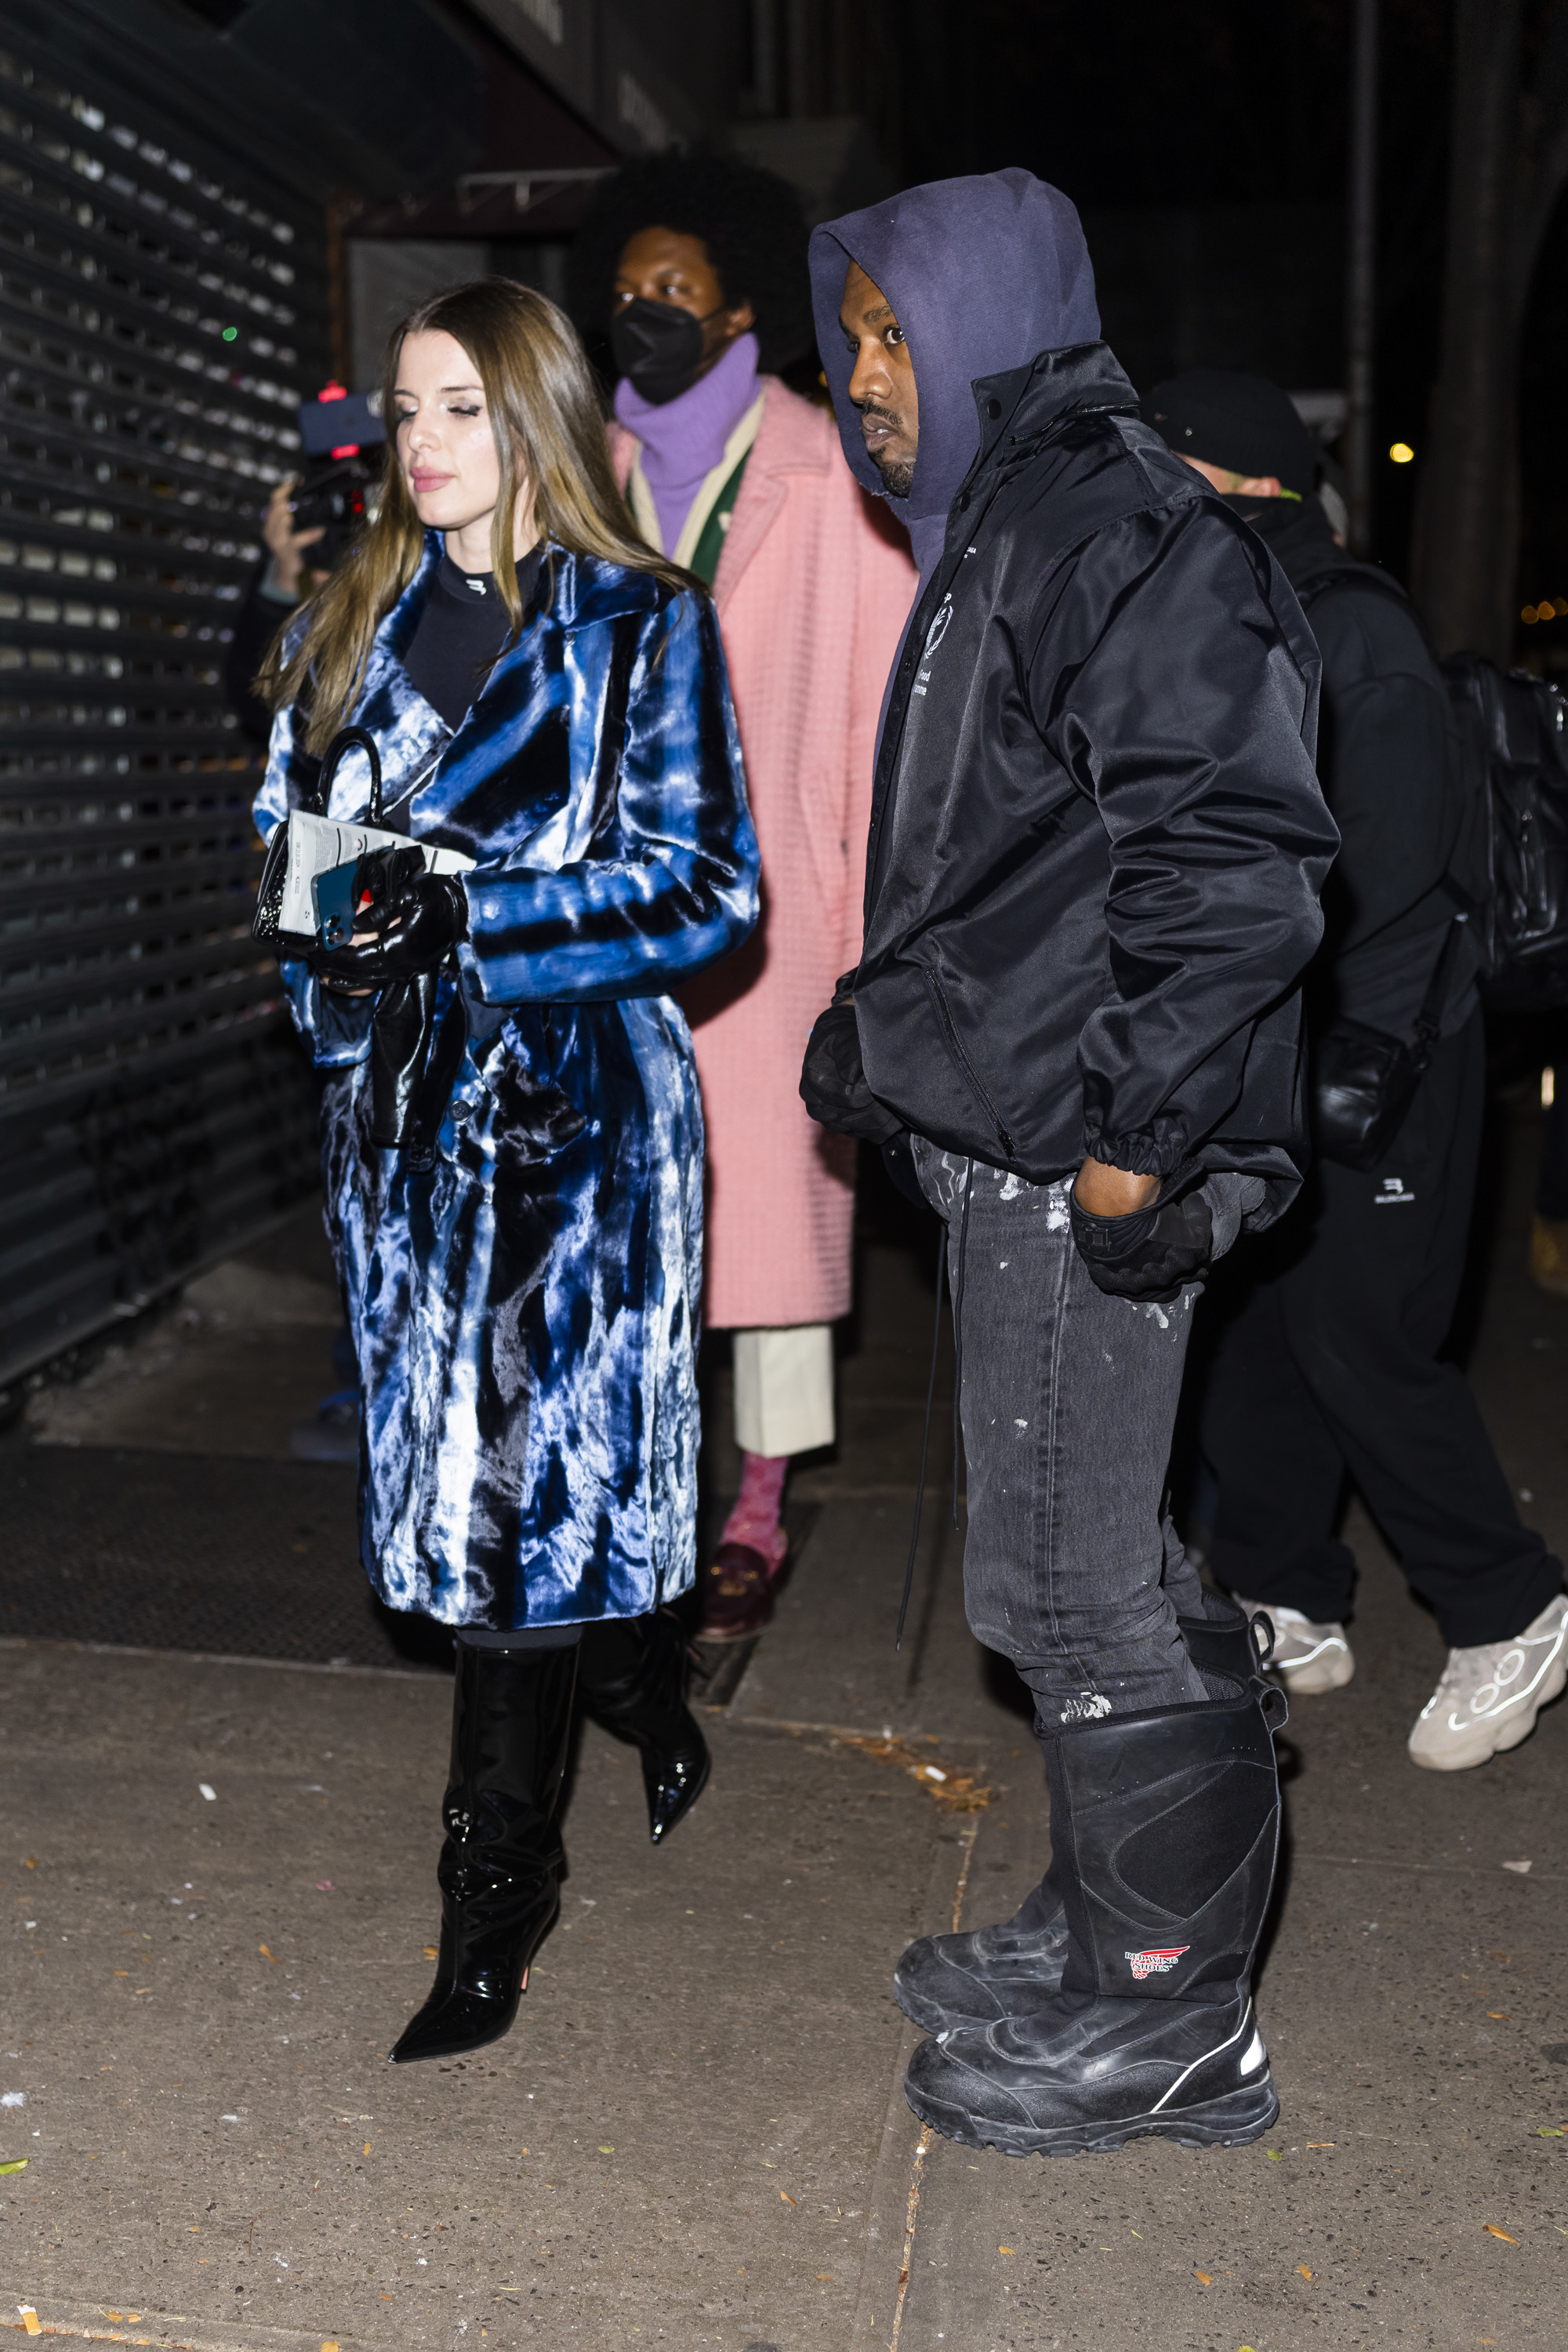 Close-up of Ye and Julia walking together